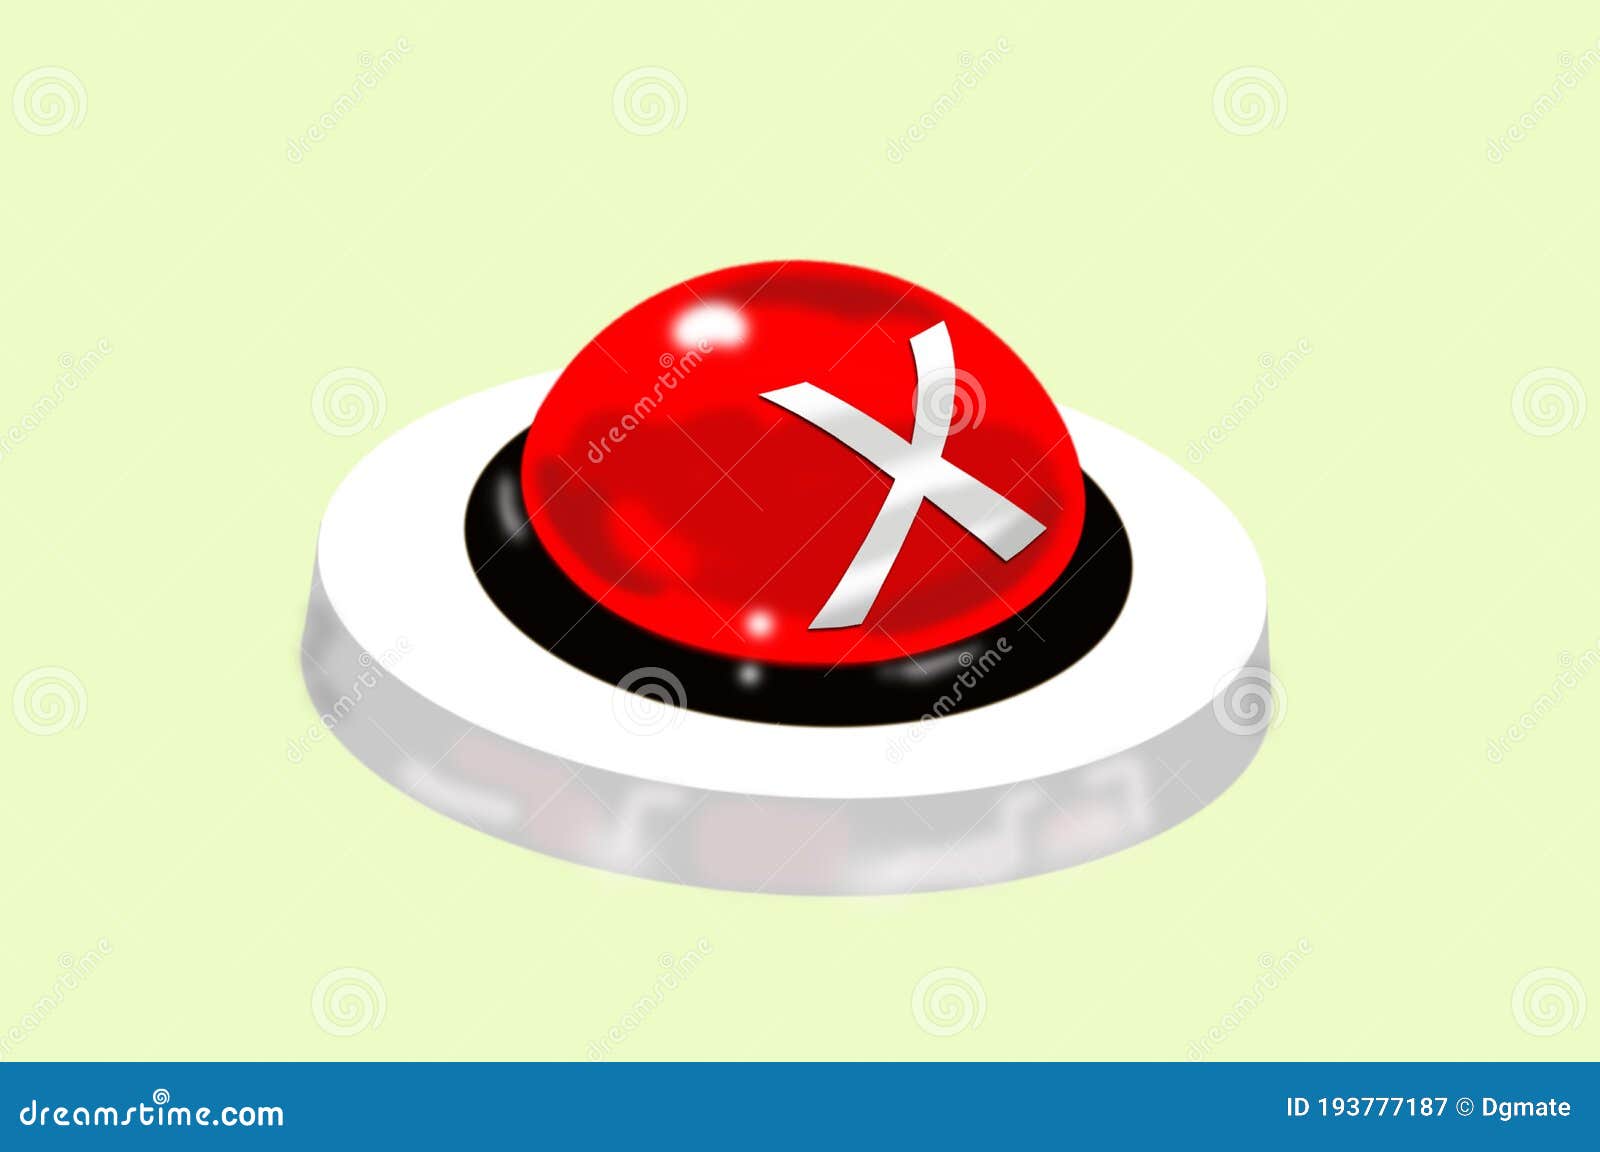 x button used in contests